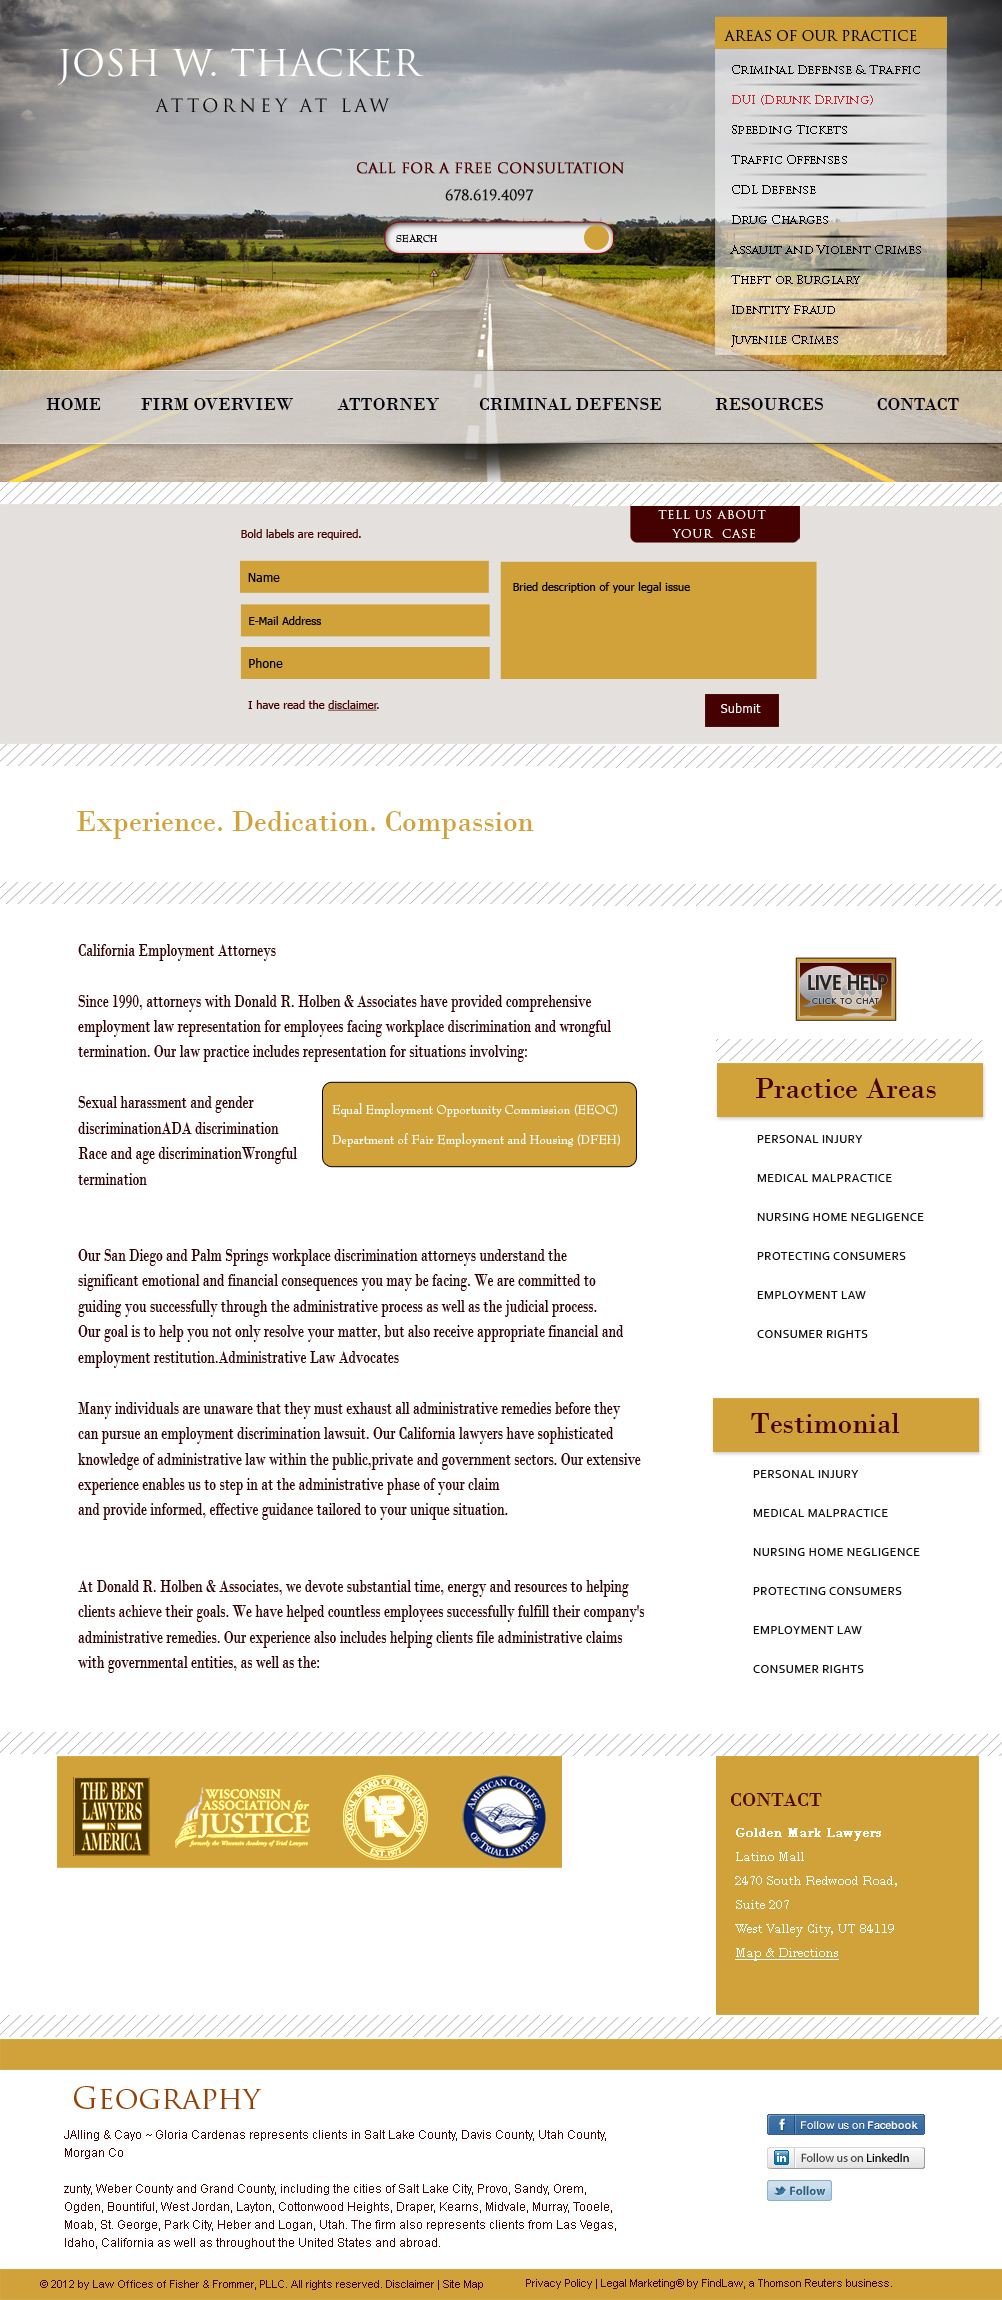 web page templates design THEMES html5